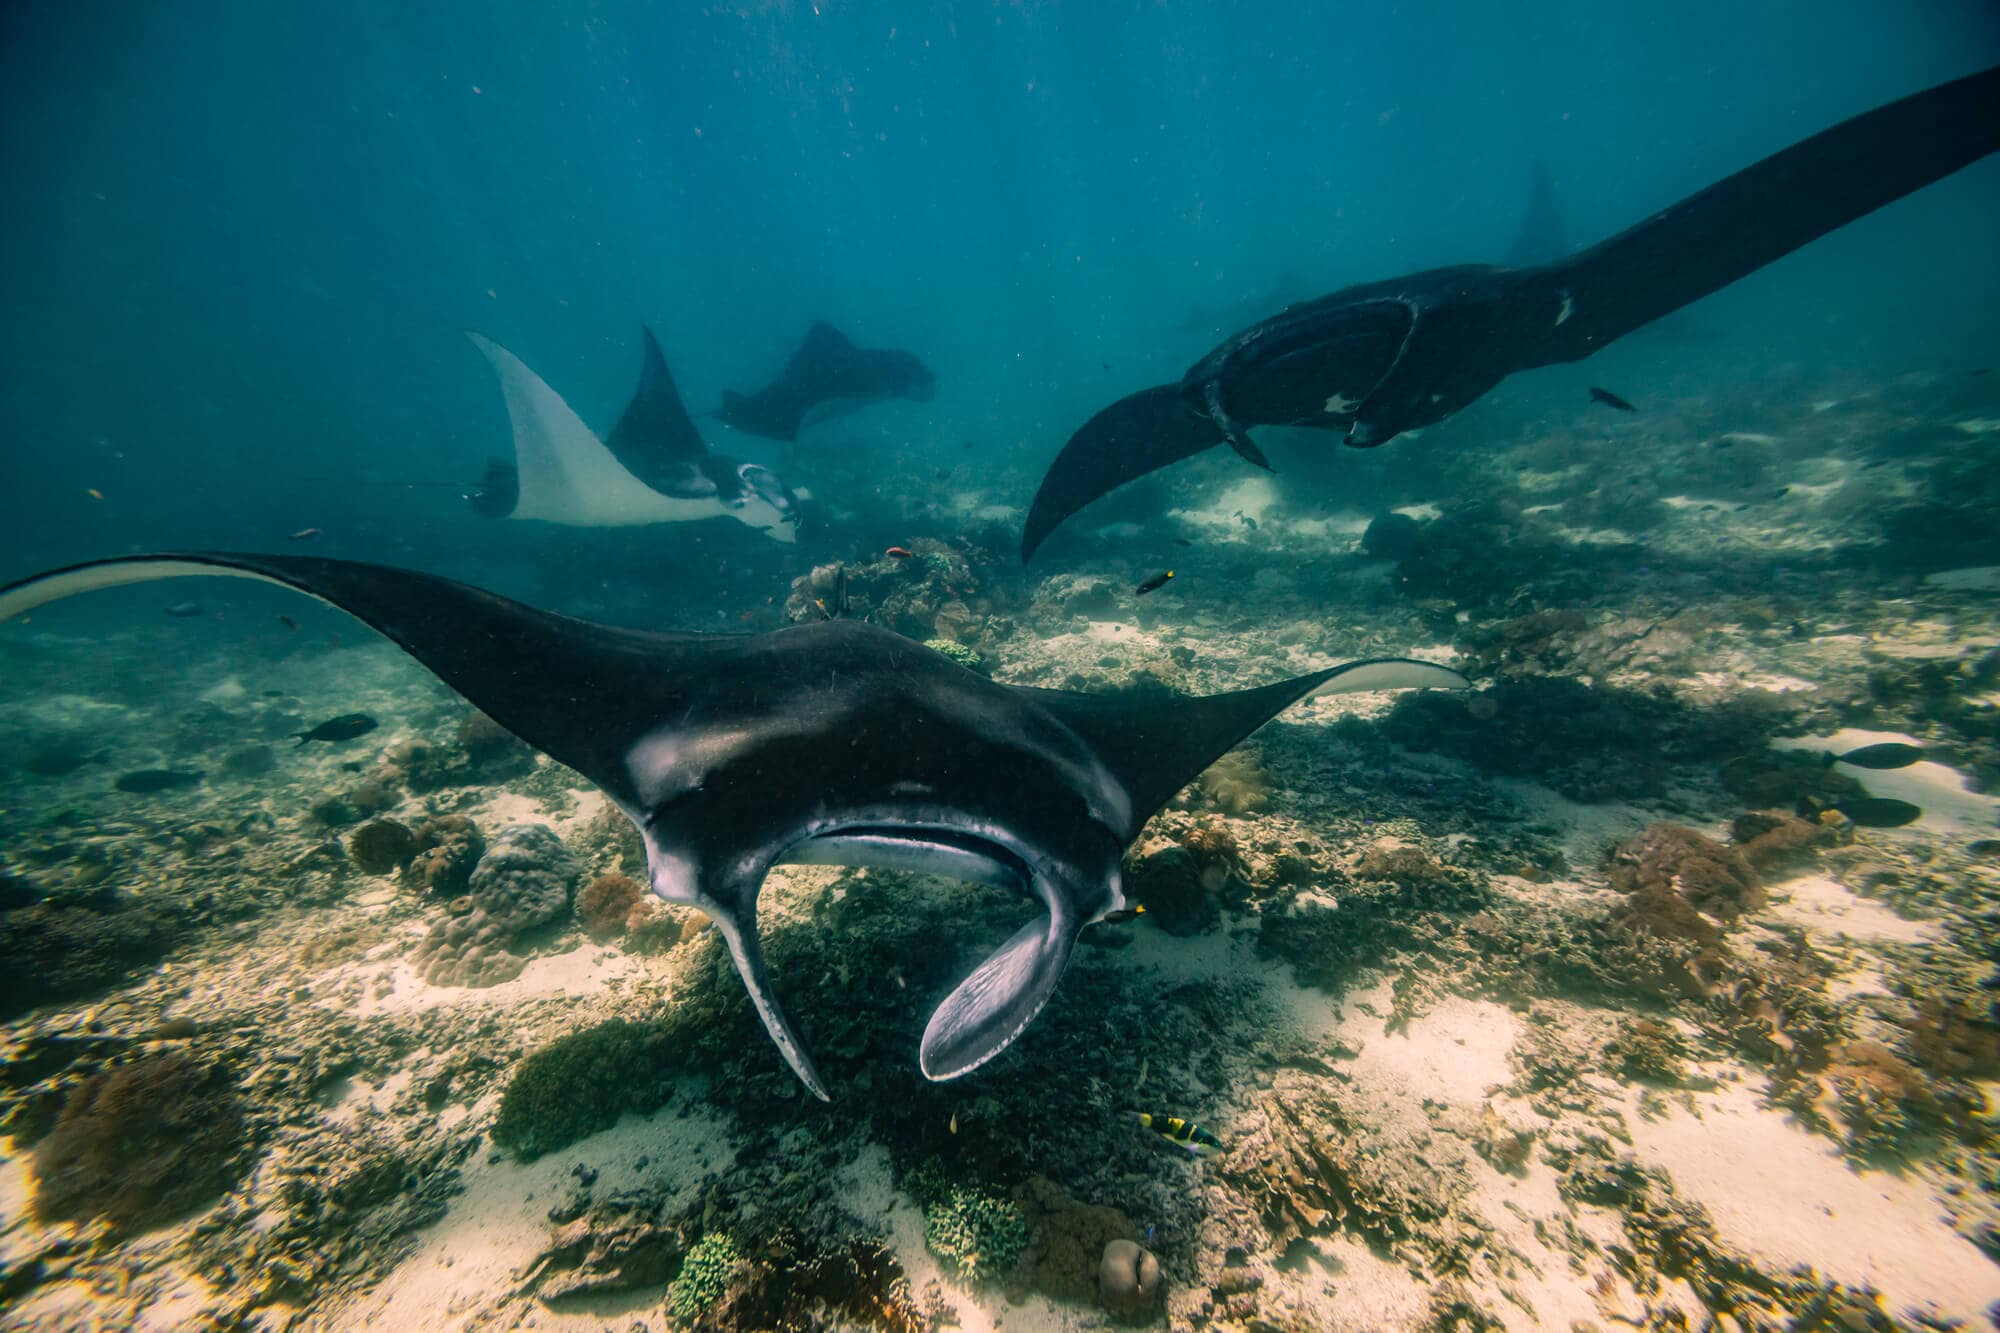 Four Manta Rays spotted while snorkeling in Nusa Penida